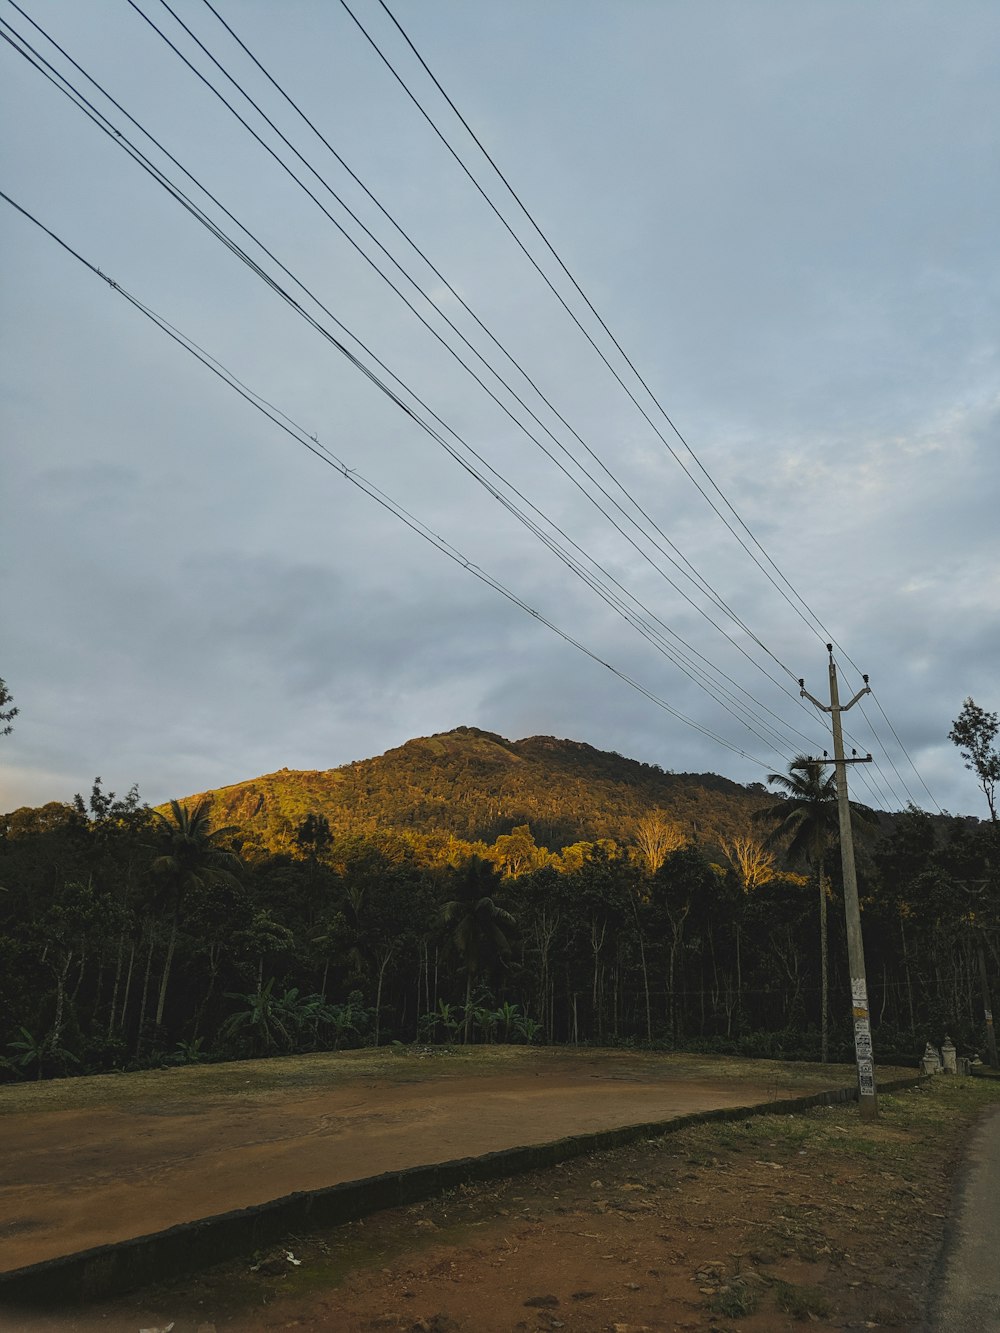 power lines above a dirt road with a mountain in the background